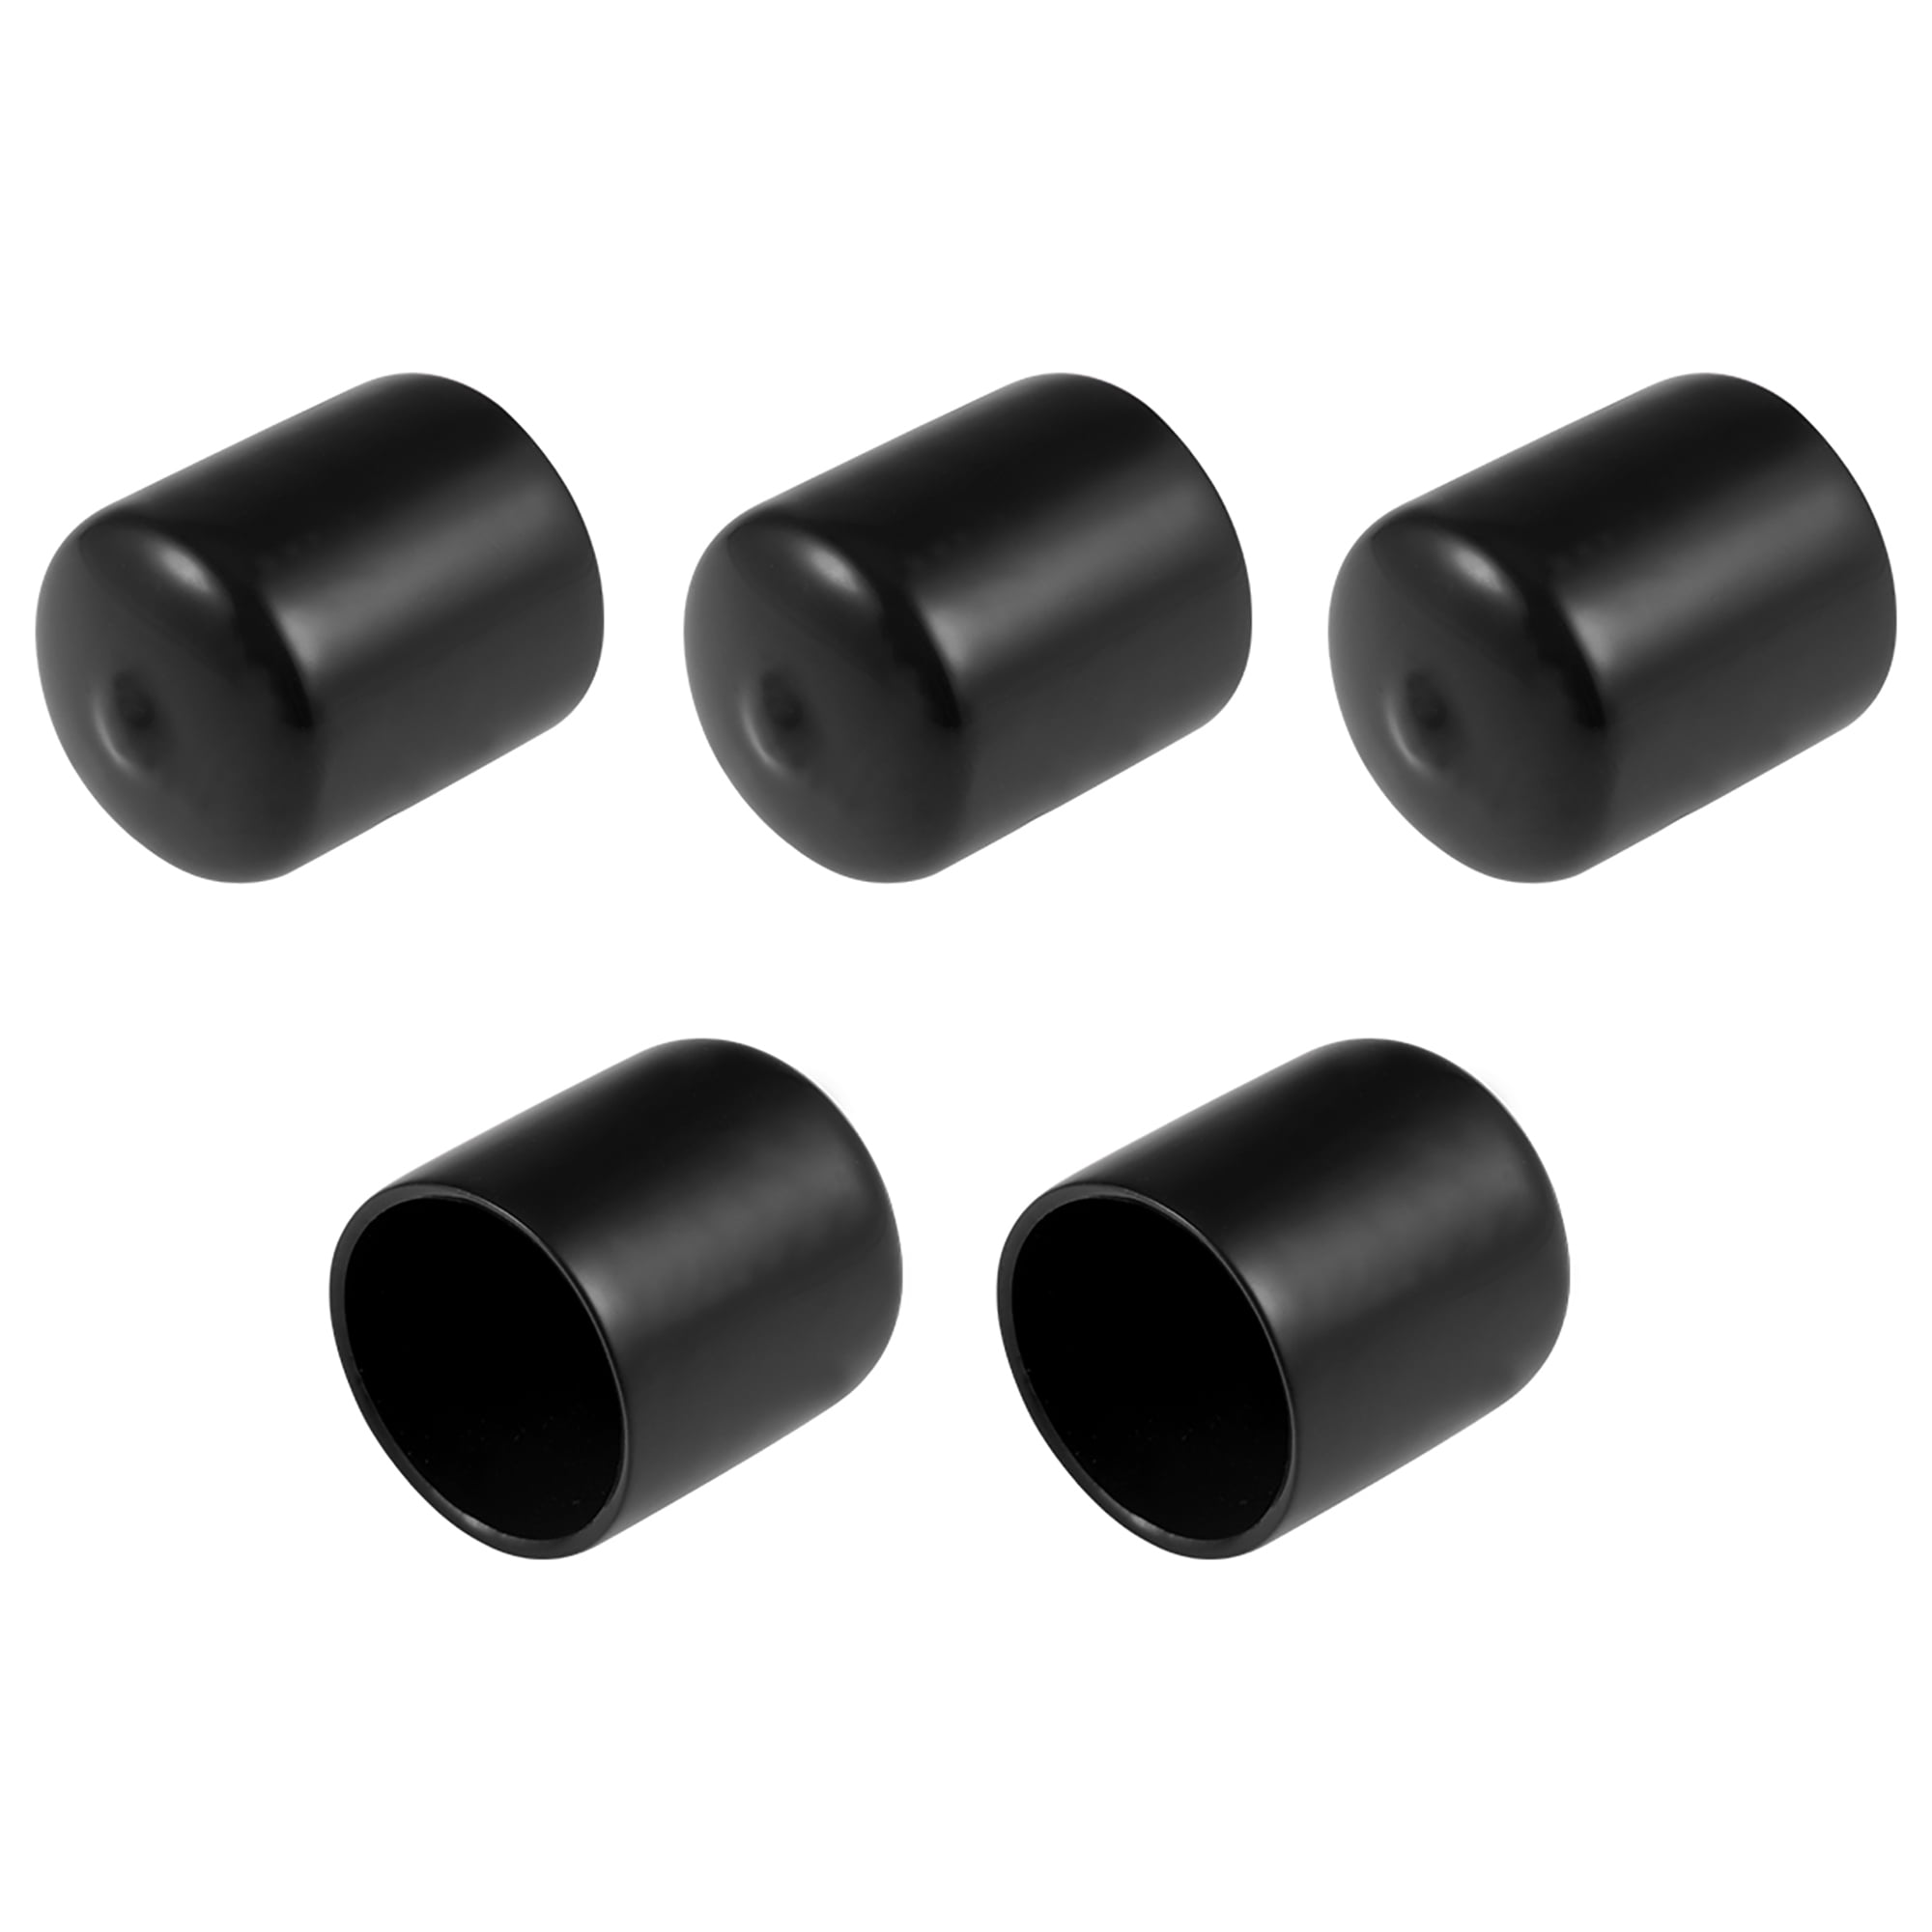 5pcs Rubber End Caps, 1-1/8 inch ID Round End Cap Cover Flexible Screw Rubber End Caps For Round Tubing Home Depot